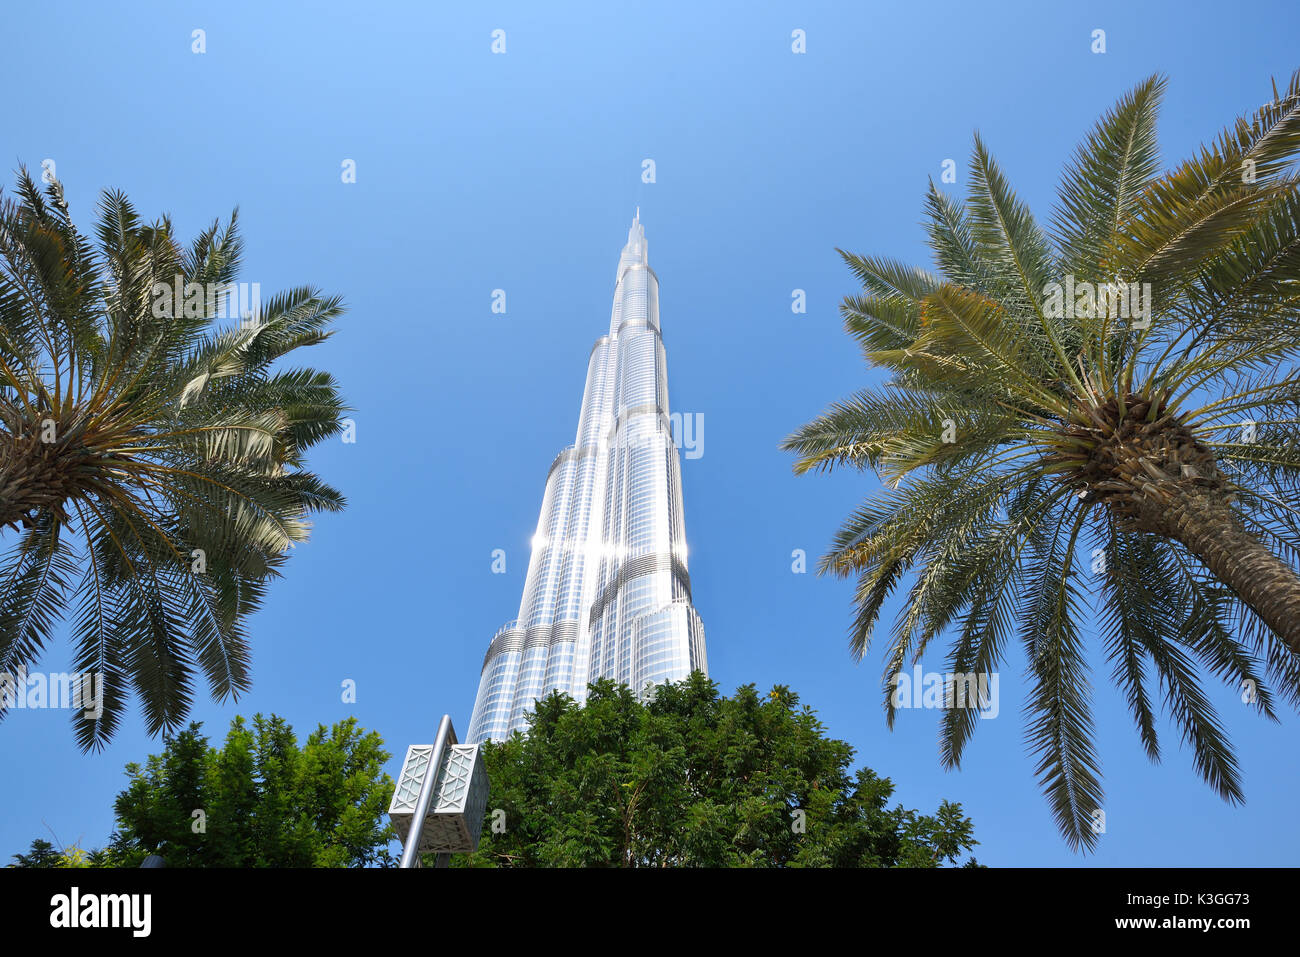 DUBAI, UNITED ARAB EMIRATES - Oct 7, 2016: Downtown Dubai with the Burj Khalifa tower. This skyscraper is the tallest man-made structure in the world, Stock Photo